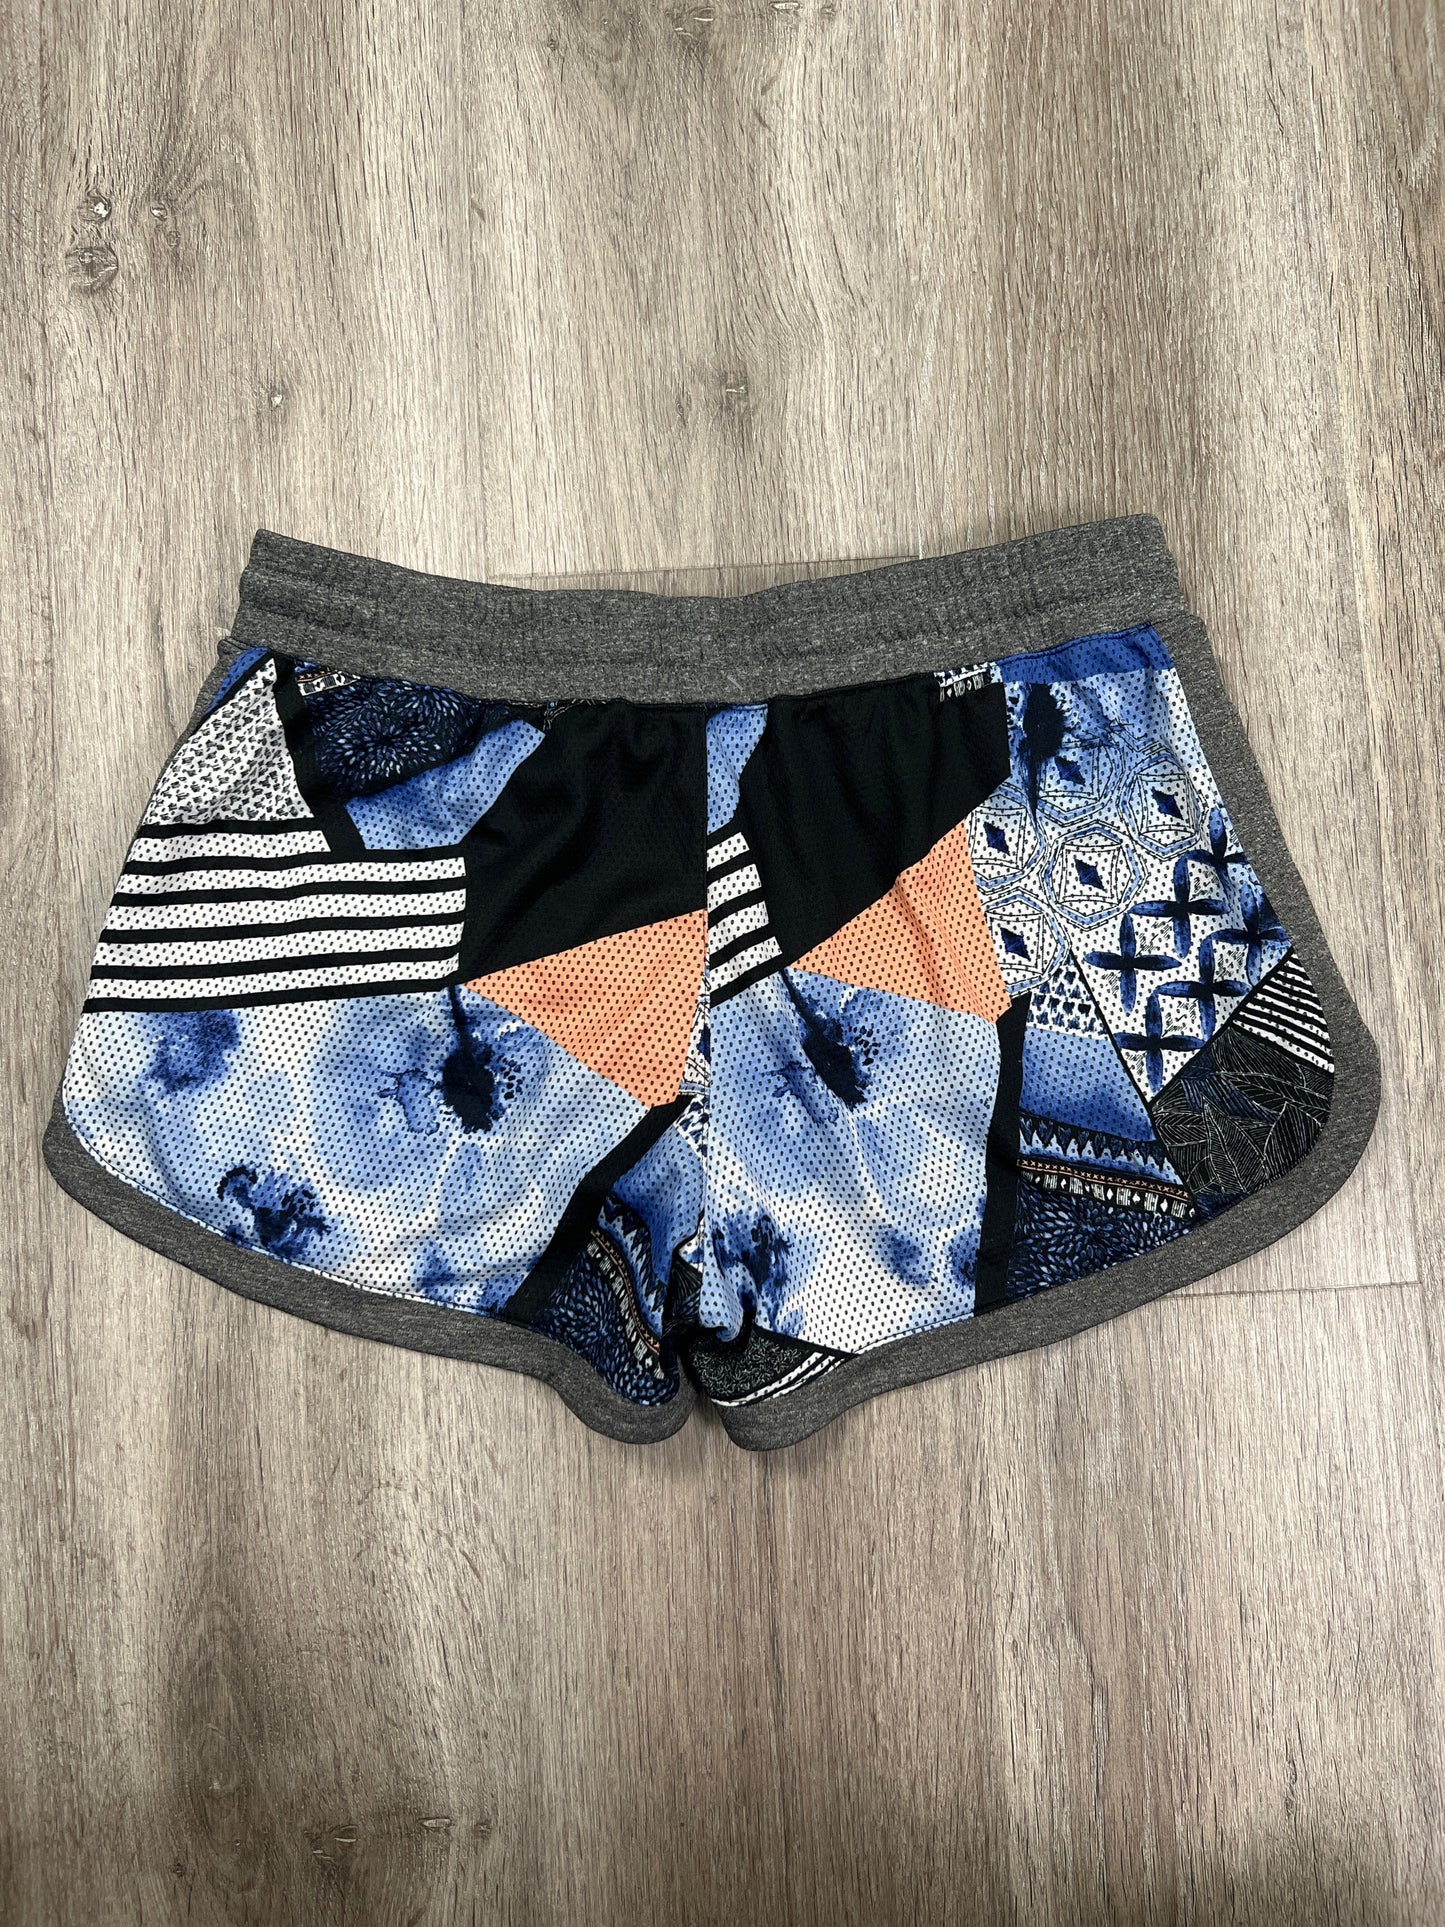 Athletic Shorts By Roxy  Size: M